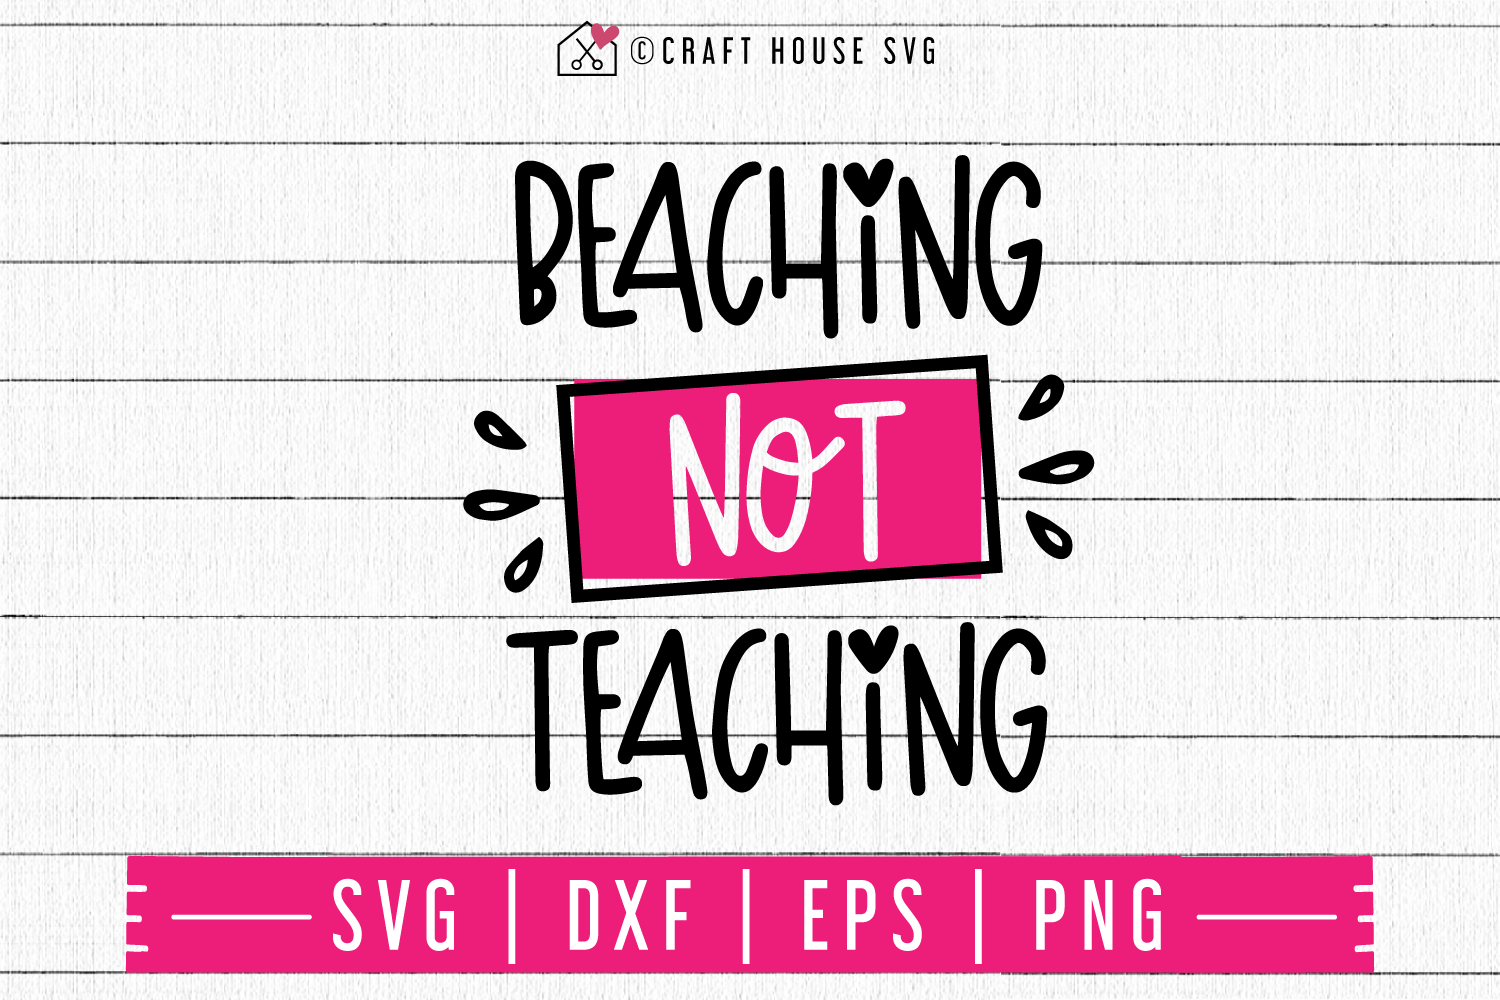 Beaching not teaching SVG | M48F | A Summer SVG cut file Craft House SVG - SVG files for Cricut and Silhouette